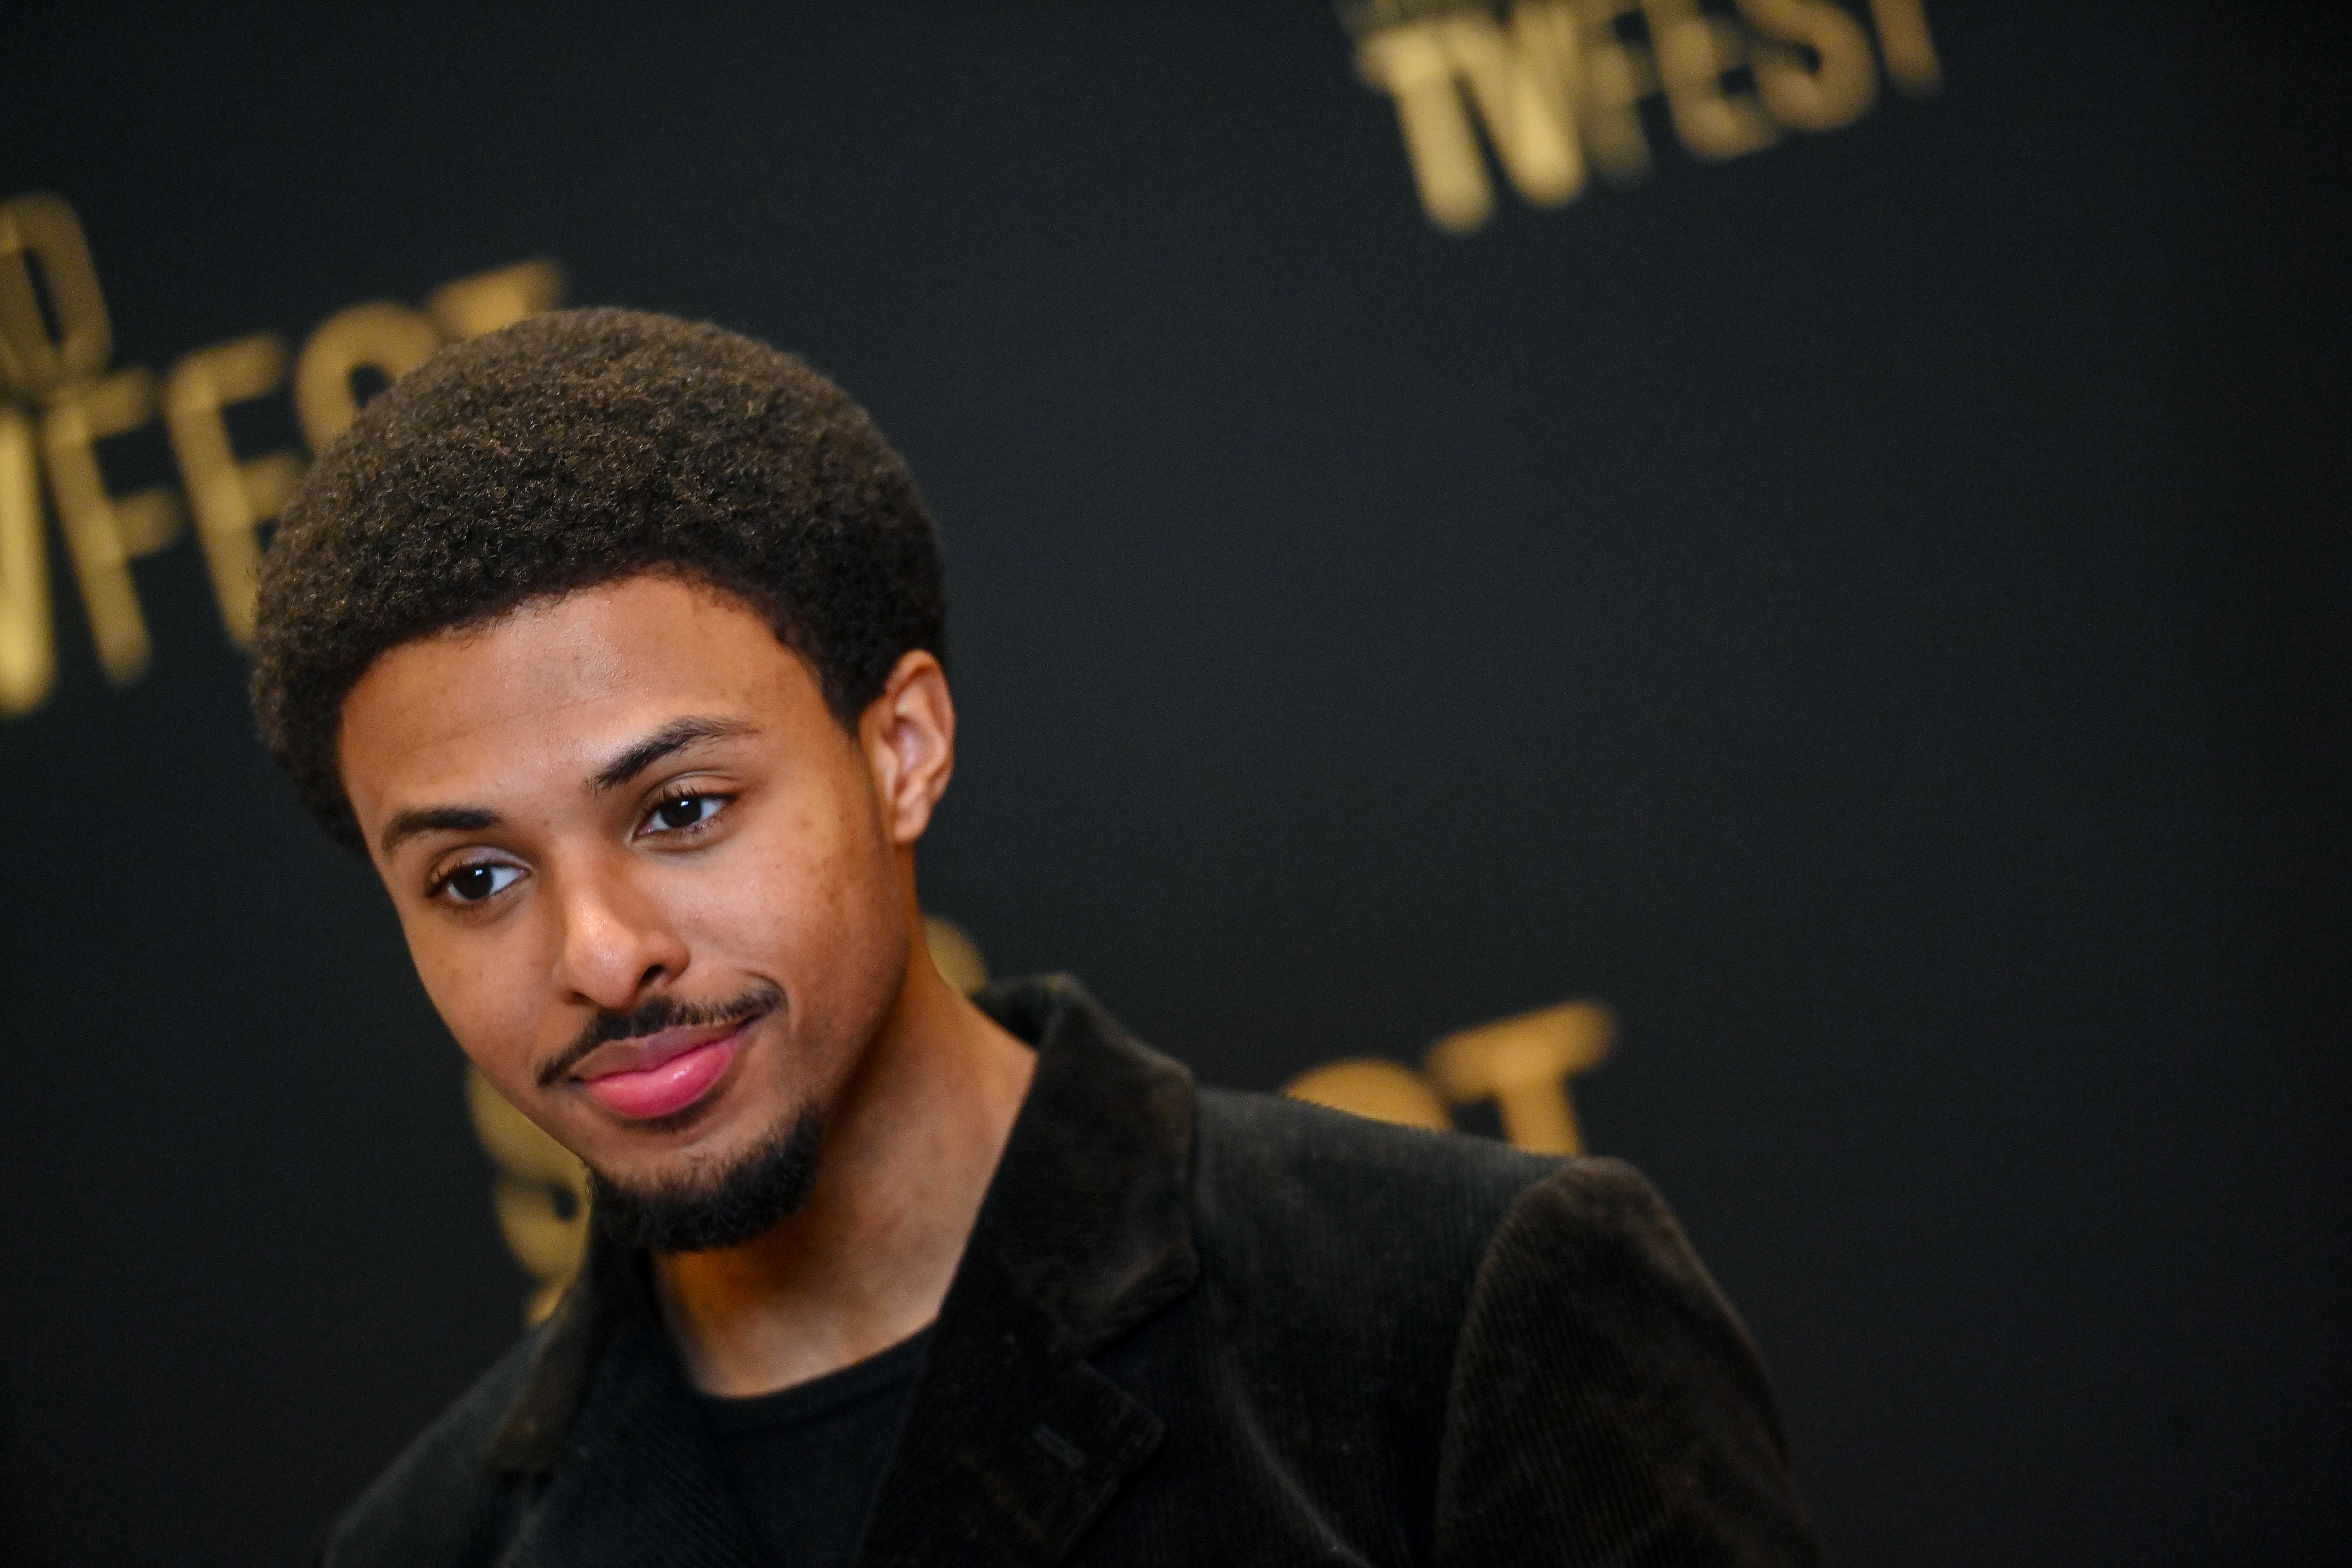 Diggy Simmons during press for "Grown-ish” at the 2023 SCAD TVfest on February 11, 2023, in Atlanta, Georgia. | Source: Getty Images